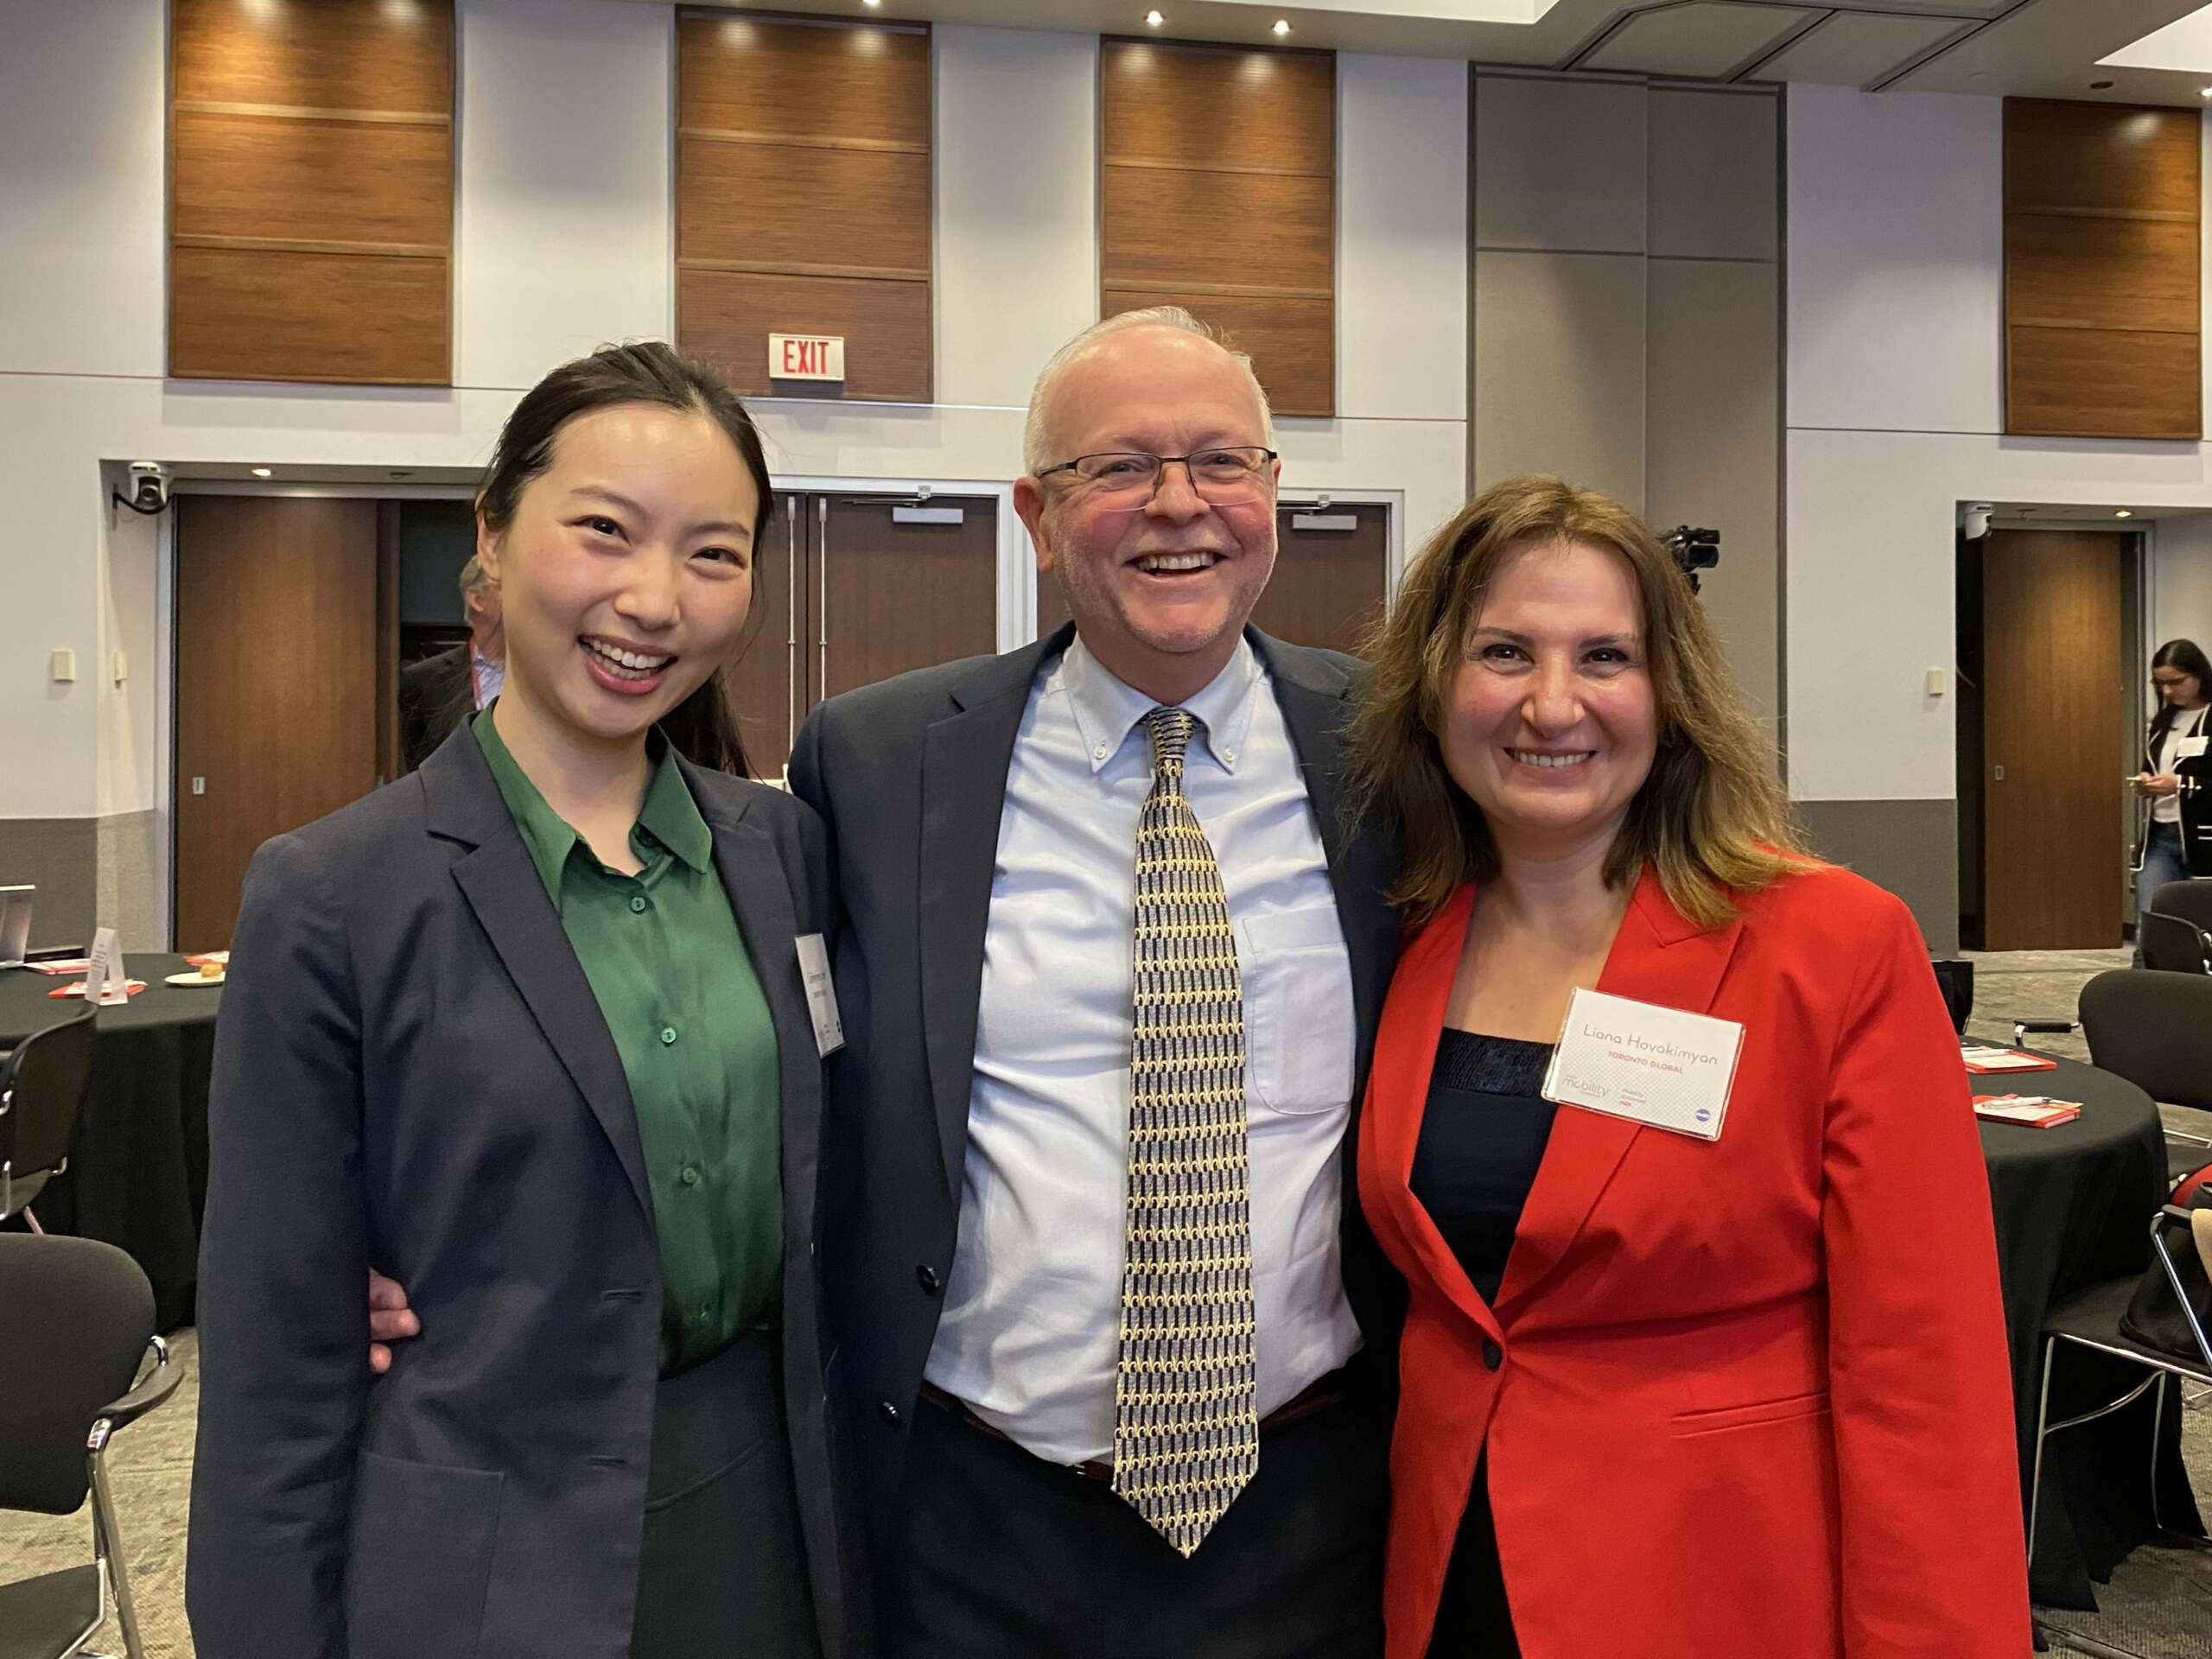 ProsFit CEO Alan Hutchison smiling with Toronto Global's Liana Hovakimyan and Catherine Lee.